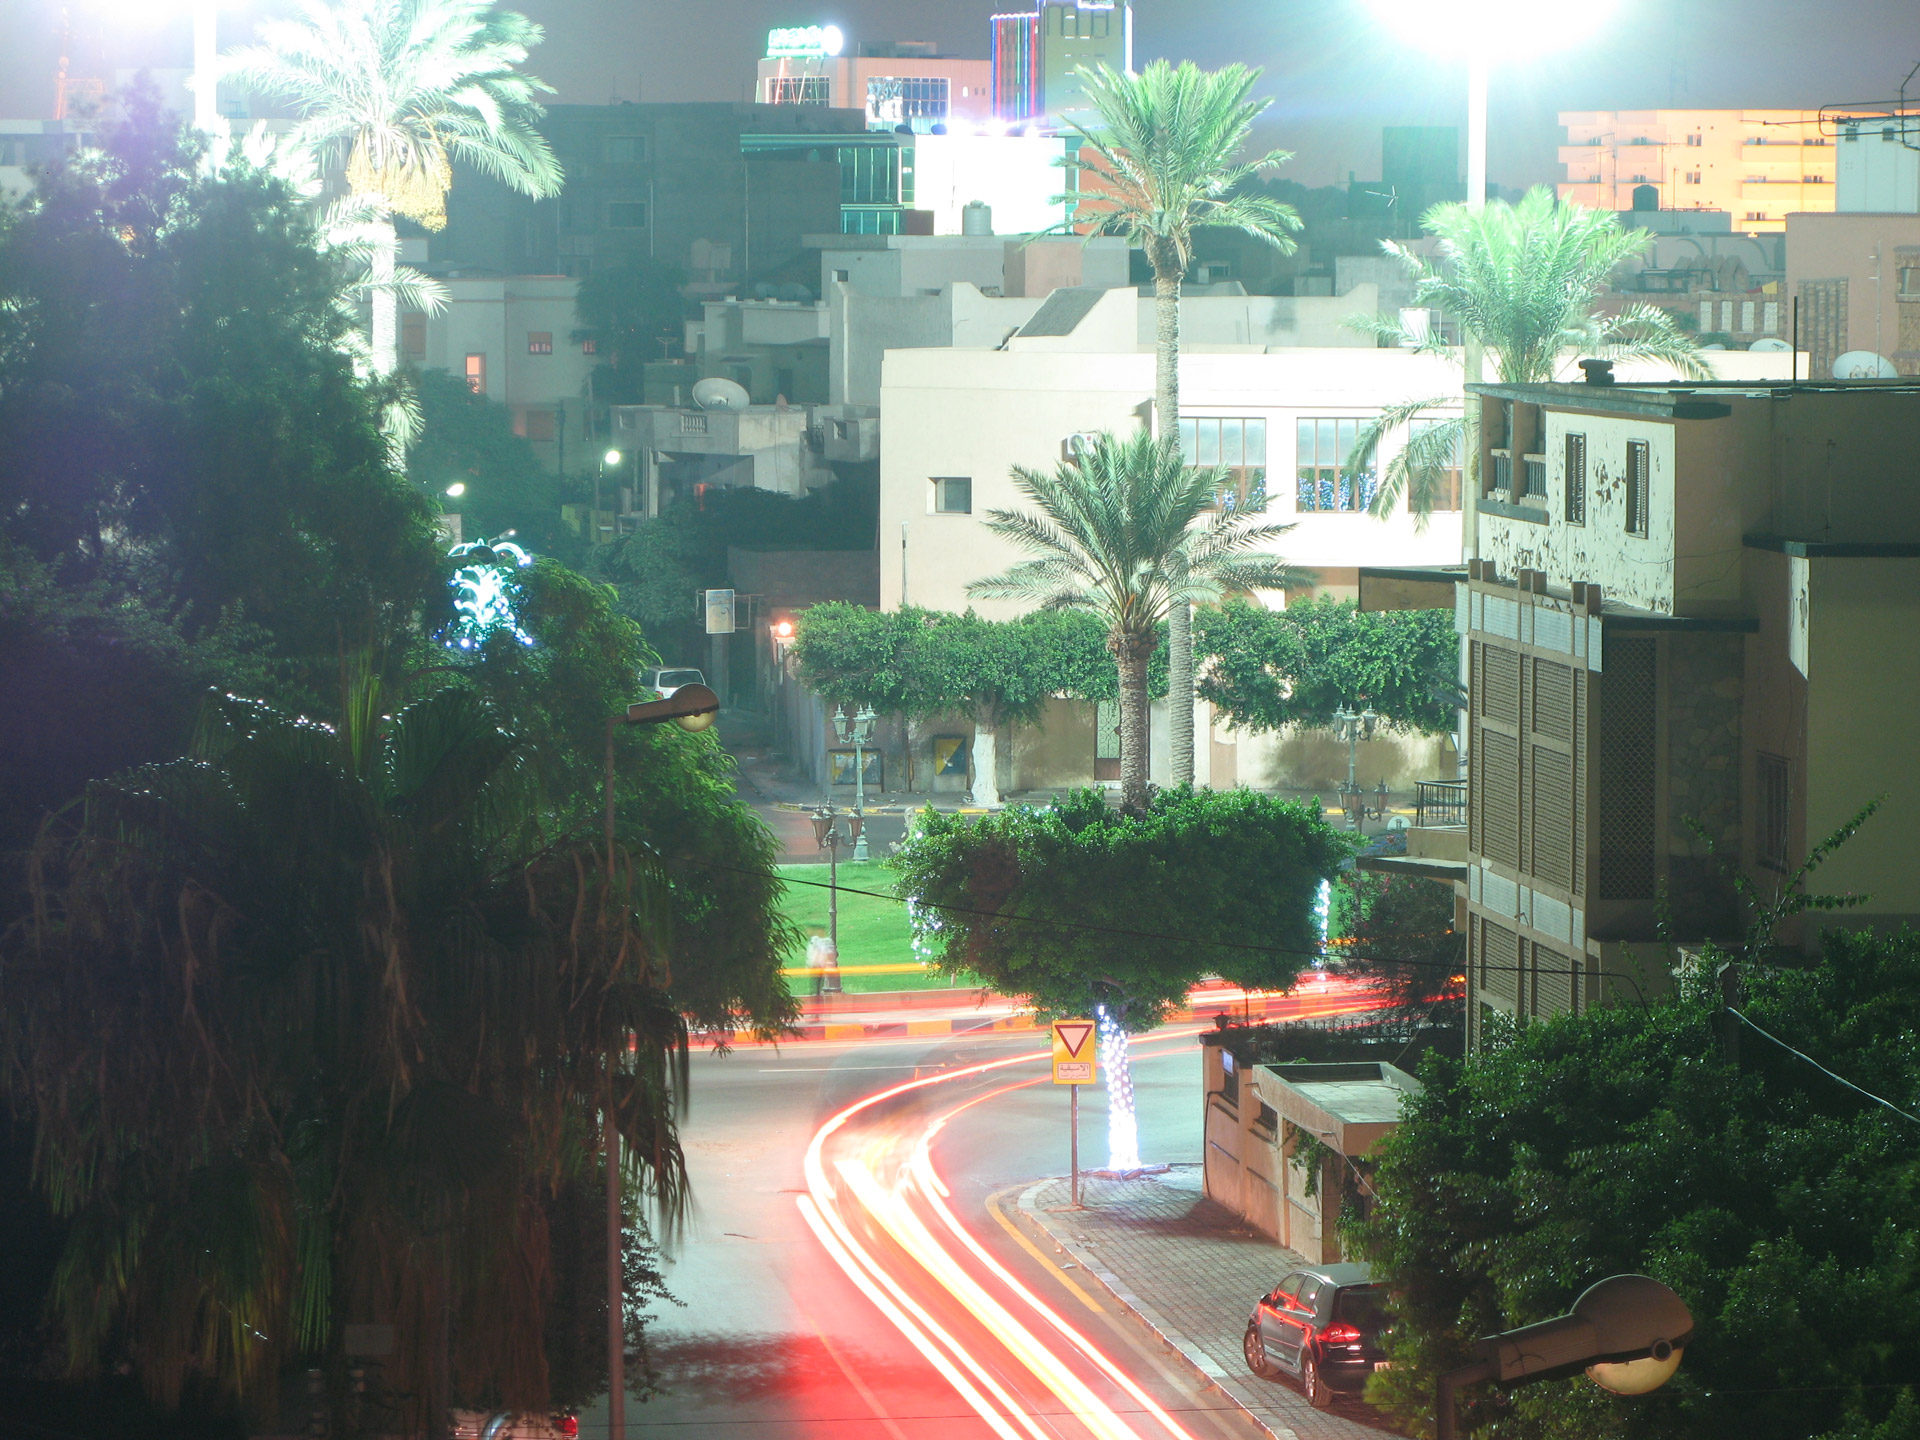 This is a series of long exposure photographs taken in Tripoli, Libya in the summer of 2009 from the rooftops of the city.